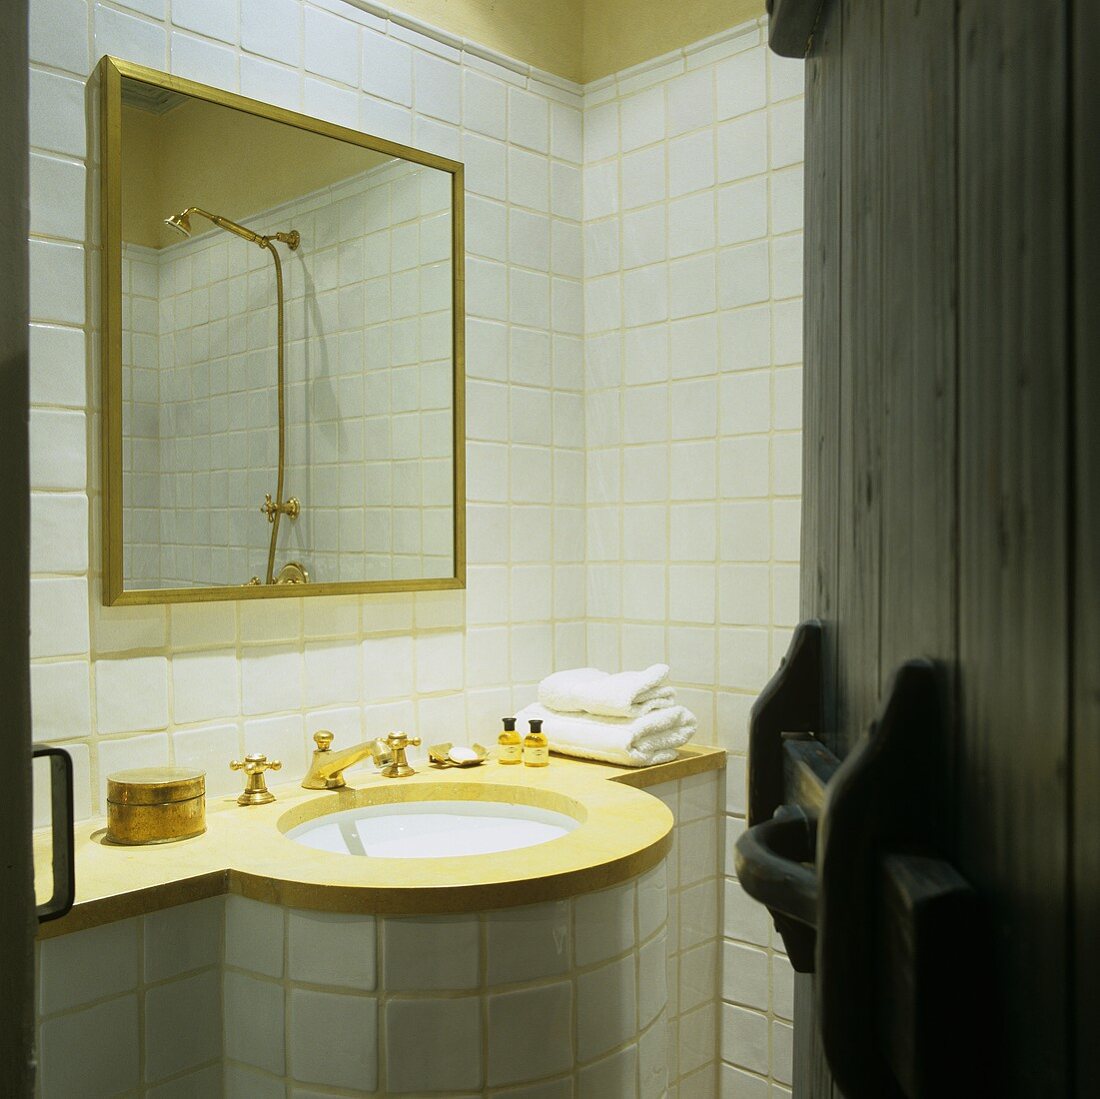 A view into a white tiled bathroom with a round basin with brass taps and a gold-framed mirror